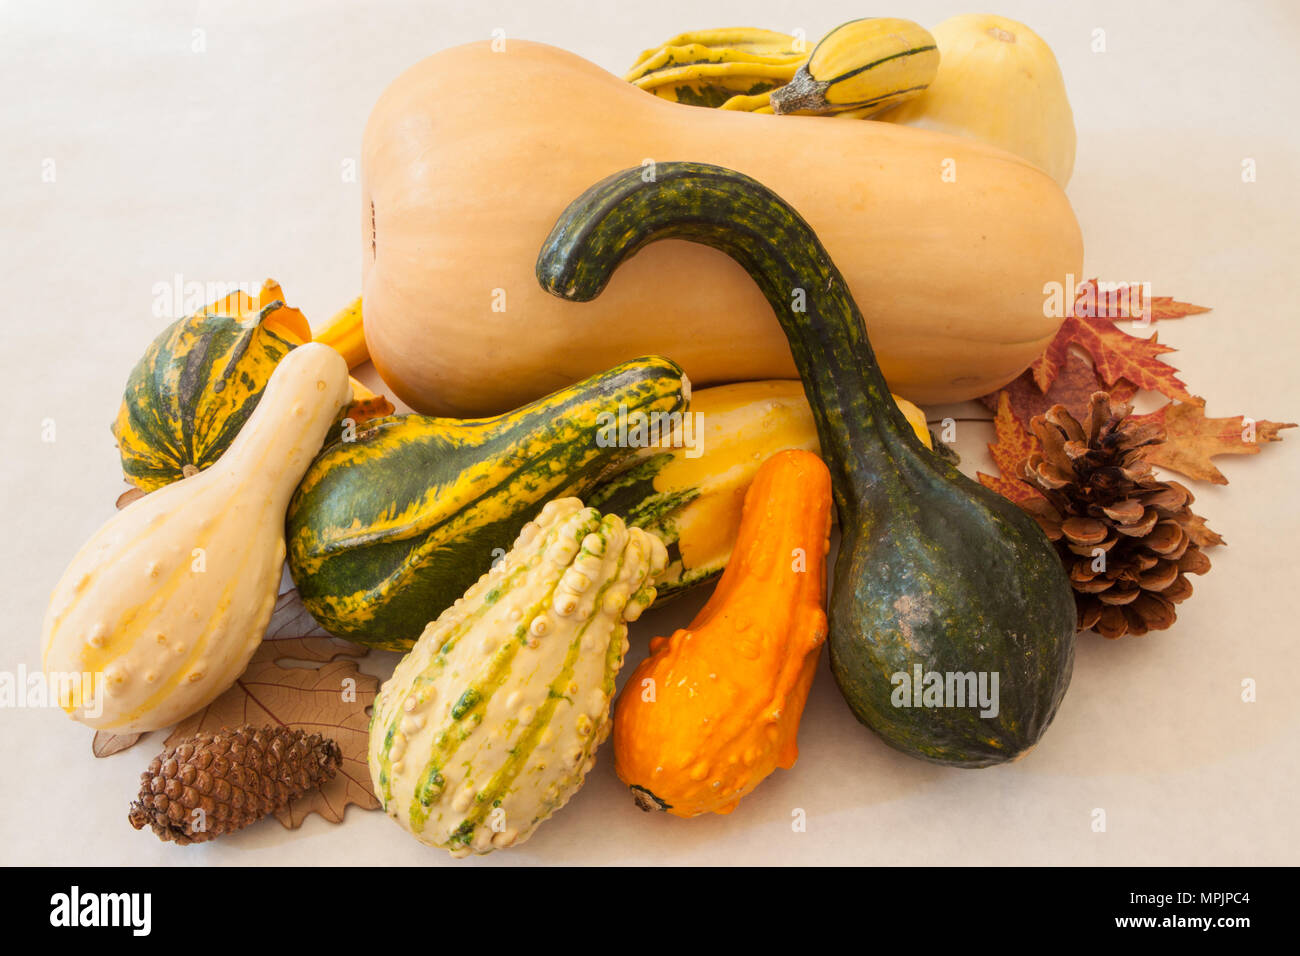 A still life of winter squash and ornamental gourds represents a bountiful harvest of nutritious foods Stock Photo